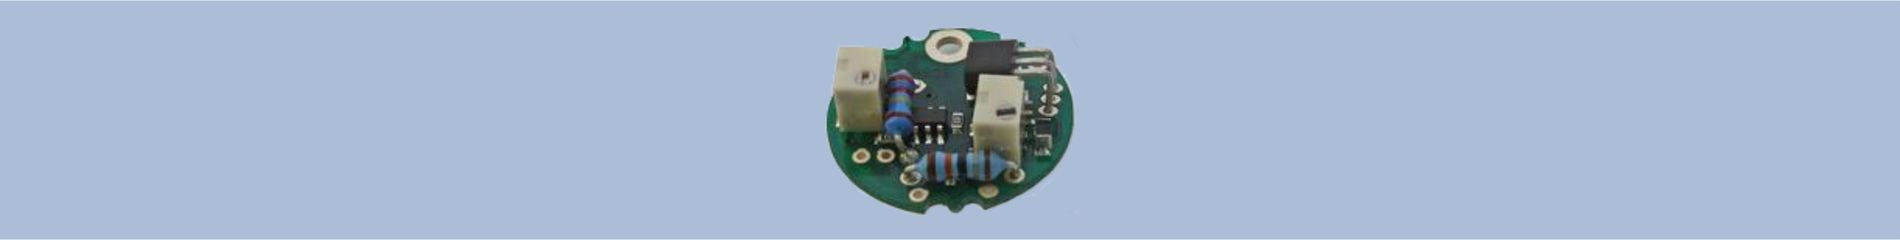 ICA5ATEX 2-wire 4-20mA ATEX Load Cell Amplifier